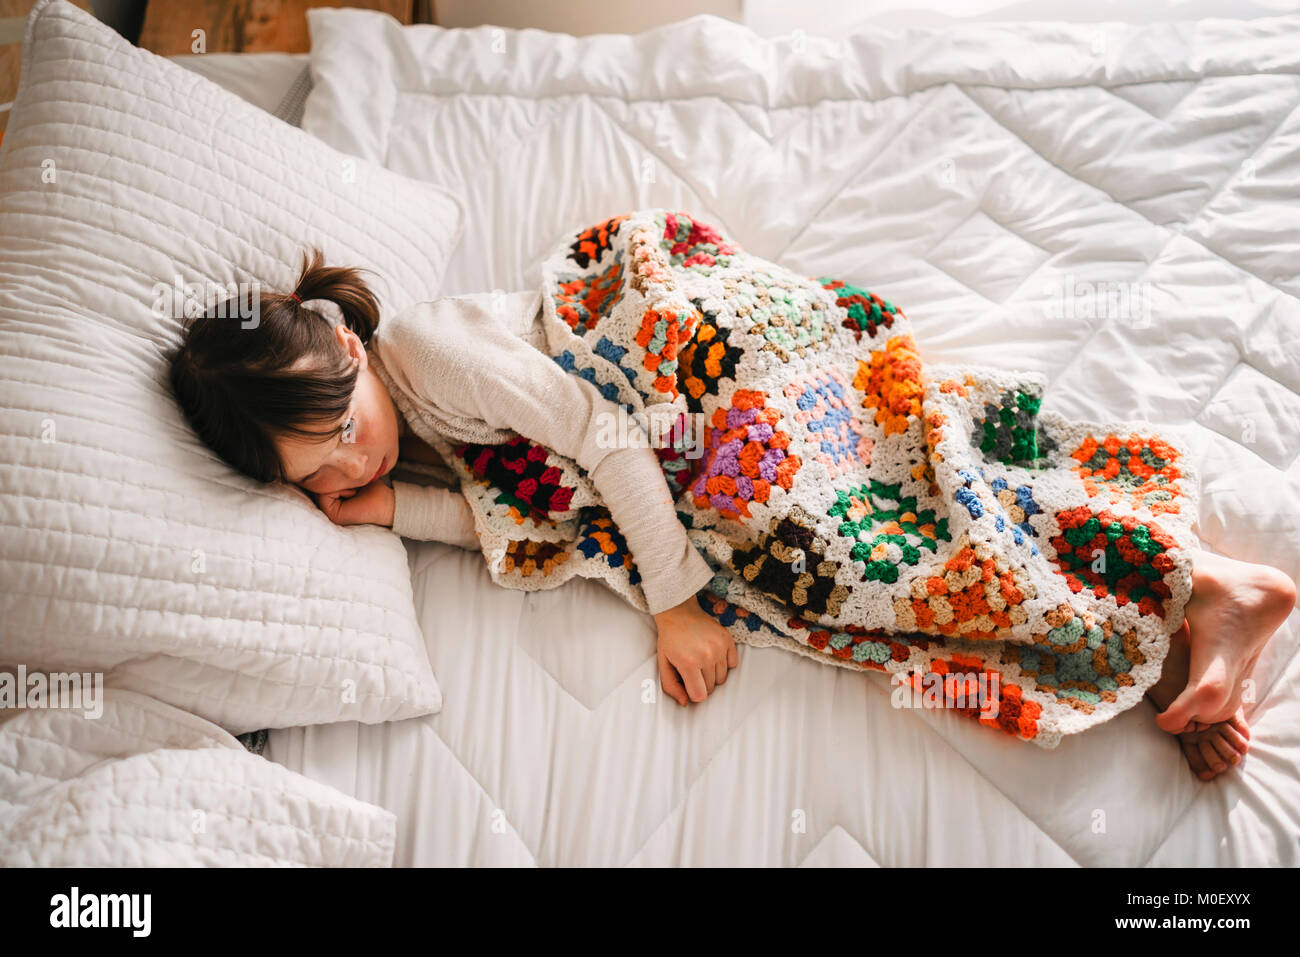 Girl lying in bed having a nap Stock Photo